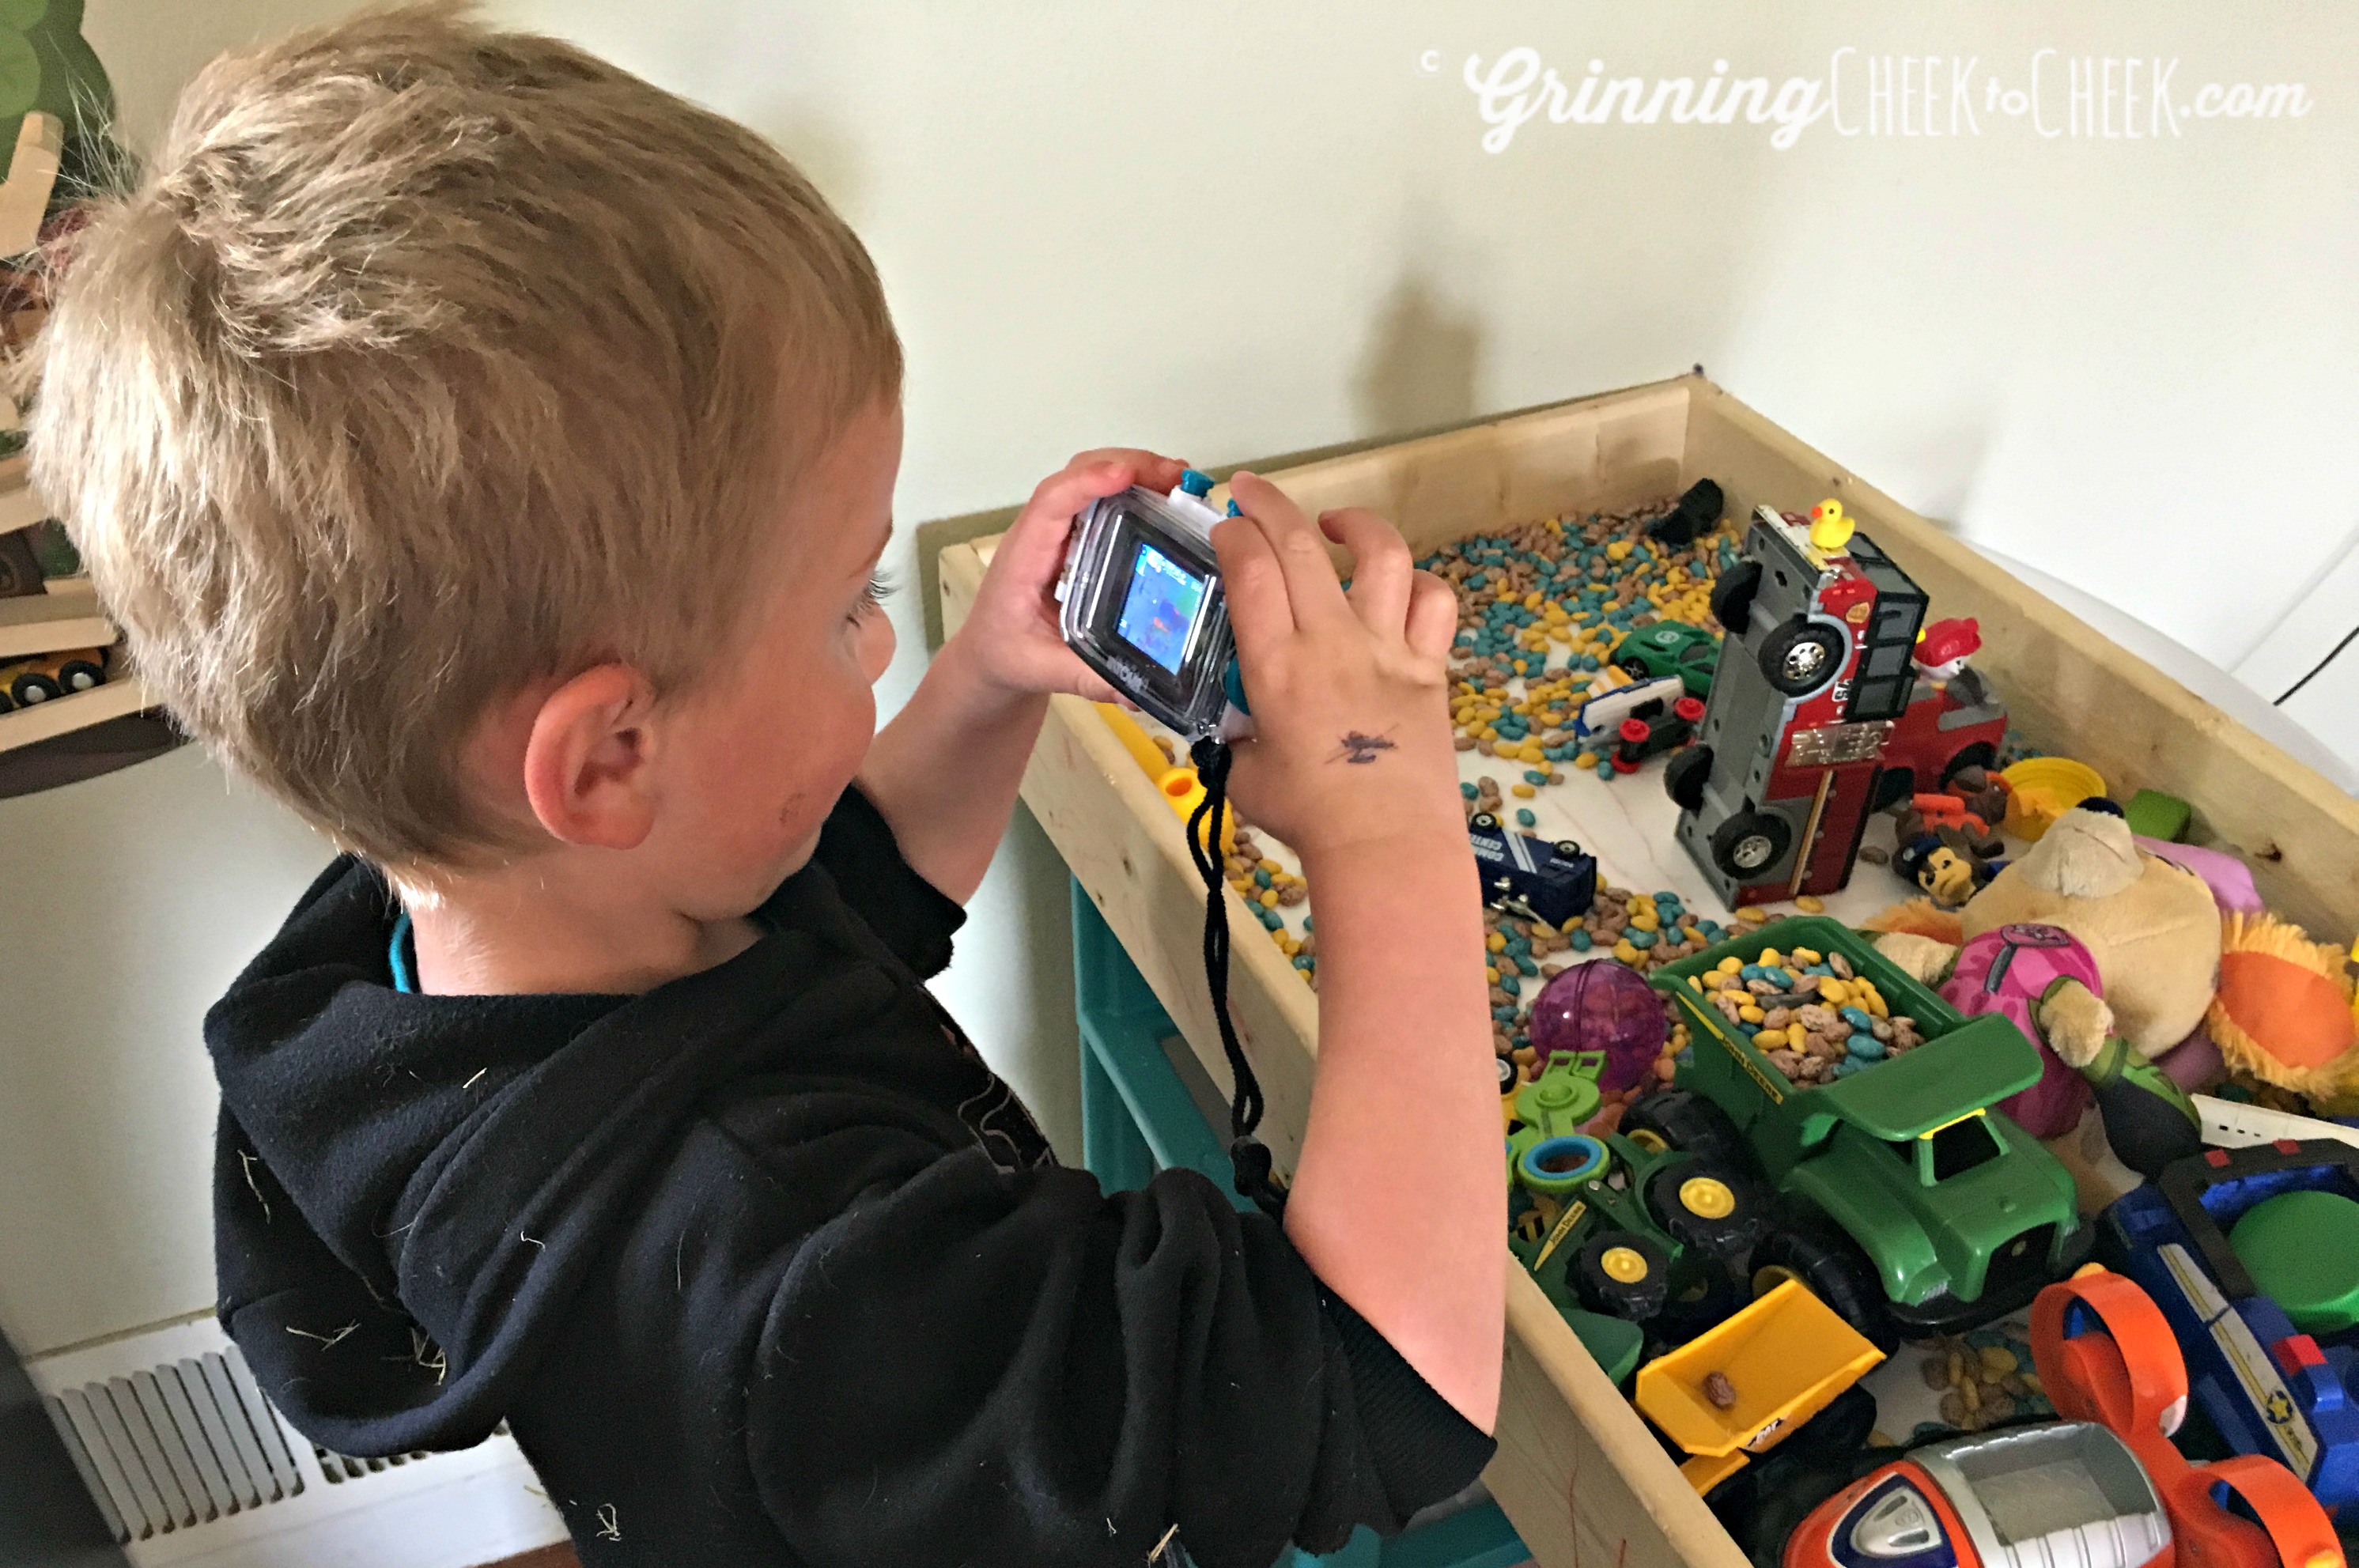 Great Camera for Kids and Adults! #Ad #Waterproof #KidsCamera #SpringFun